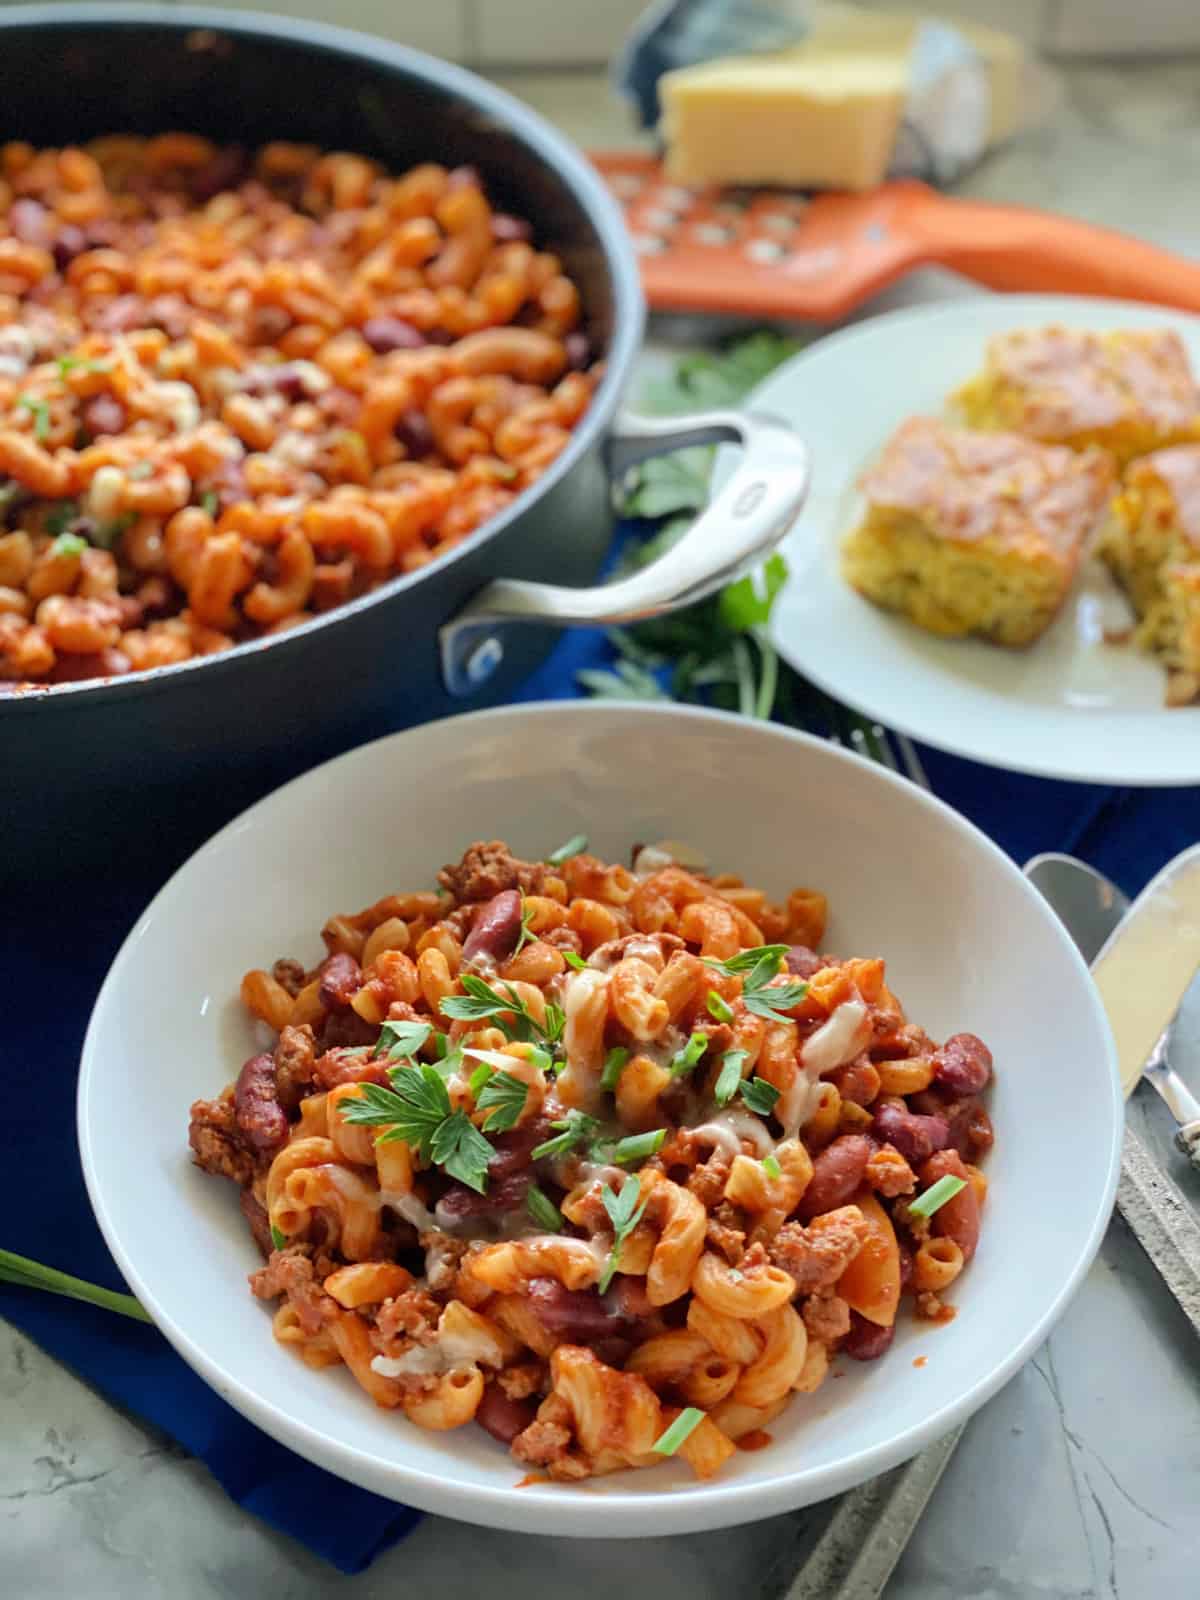 Chili pasta in white bowl with skillet slices of cornbread in background